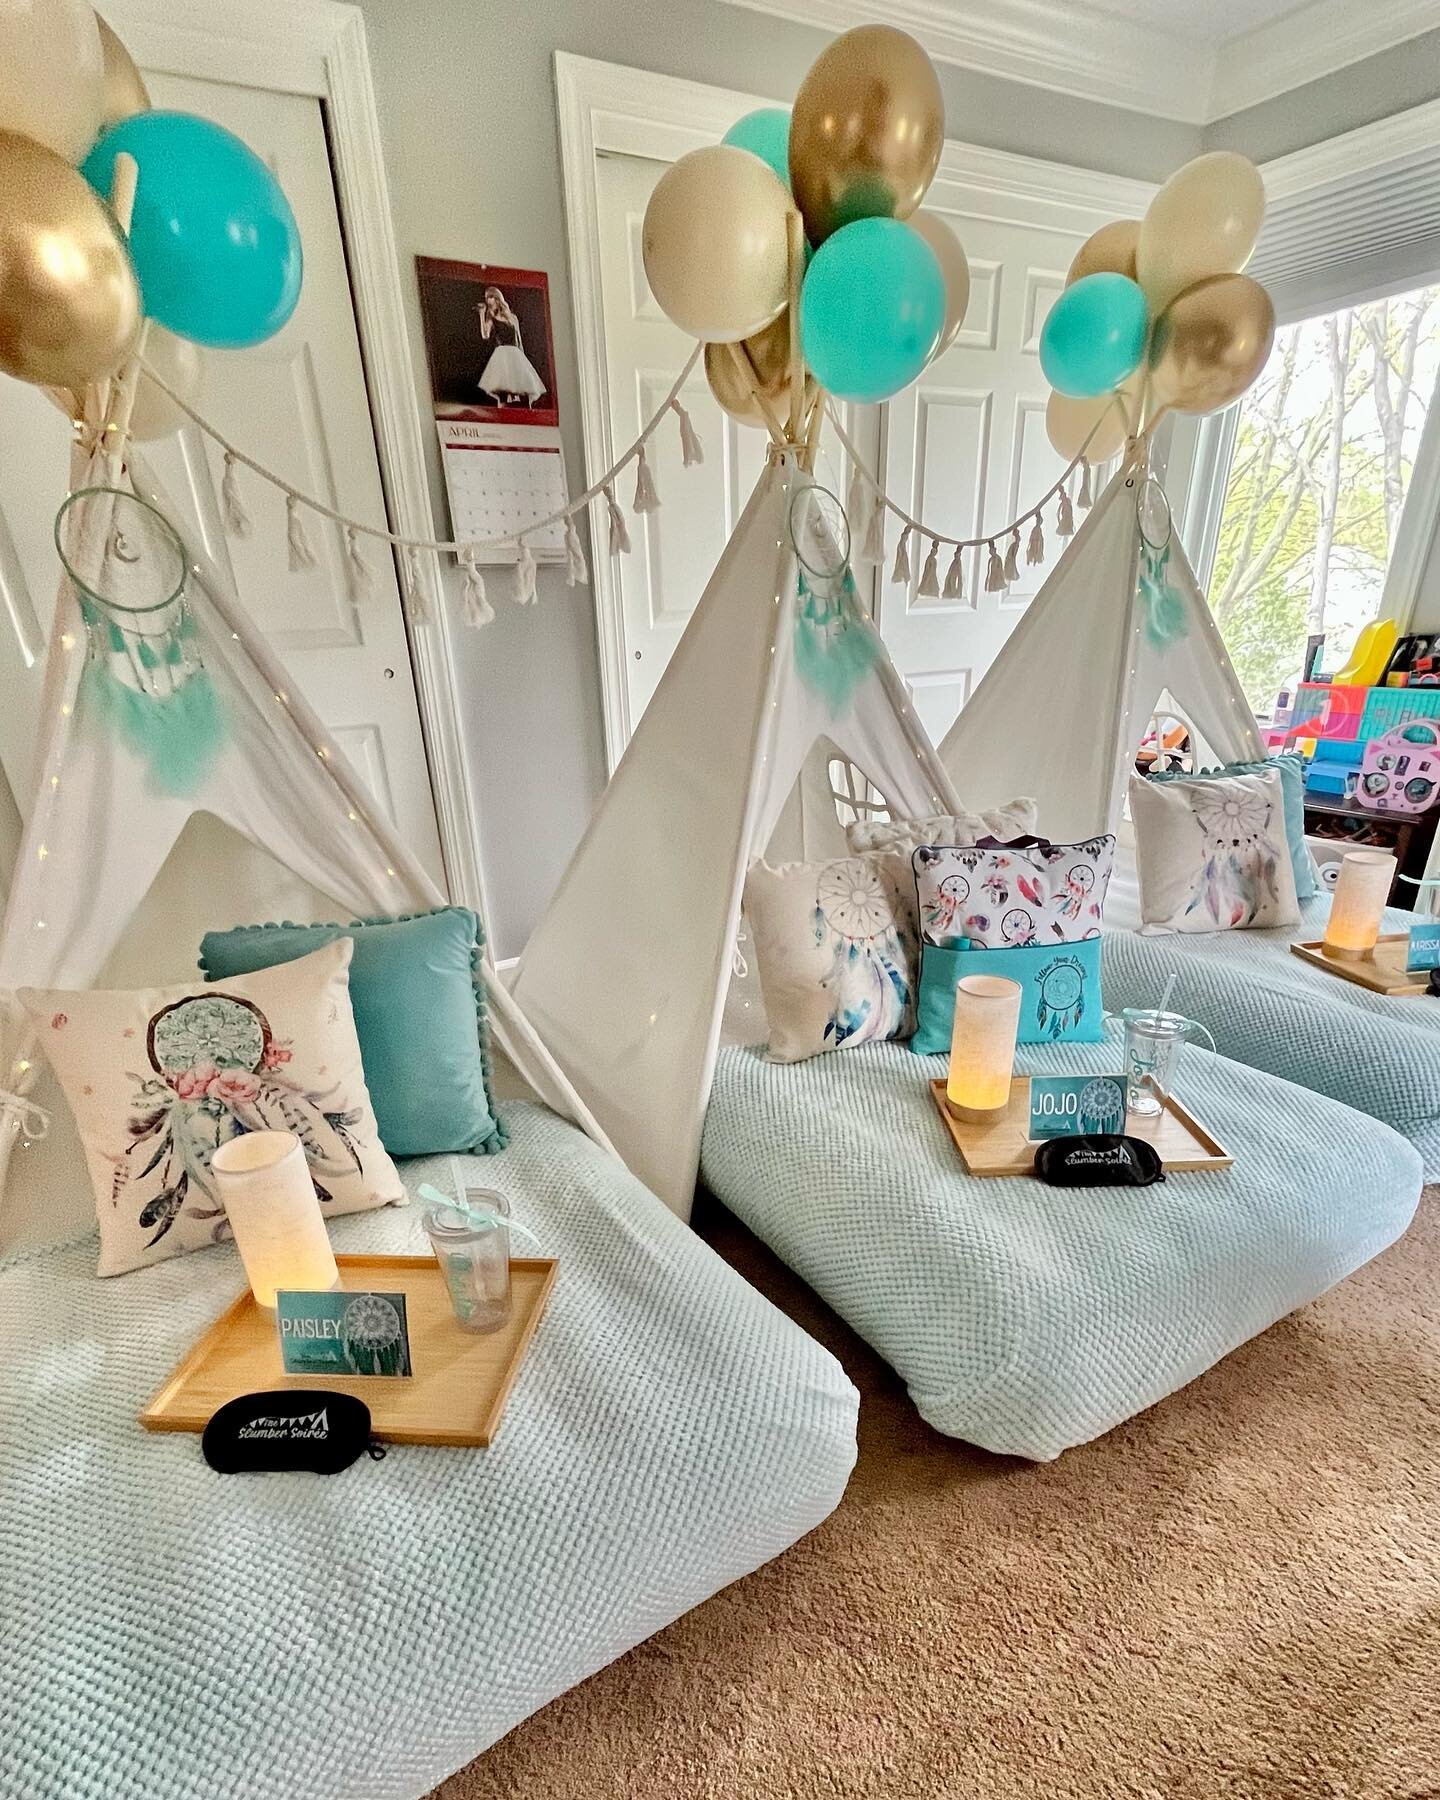 Happy 8th Birthday JoJo! 🥳 We hope you loved your Boho Dreamer Sleepover! 🪶 We added a NEW Journey pillow to this theme made by @mfad.creations and it is now my new favorite and is just stunning! (Scroll to last pictures for a close up!)

We also s